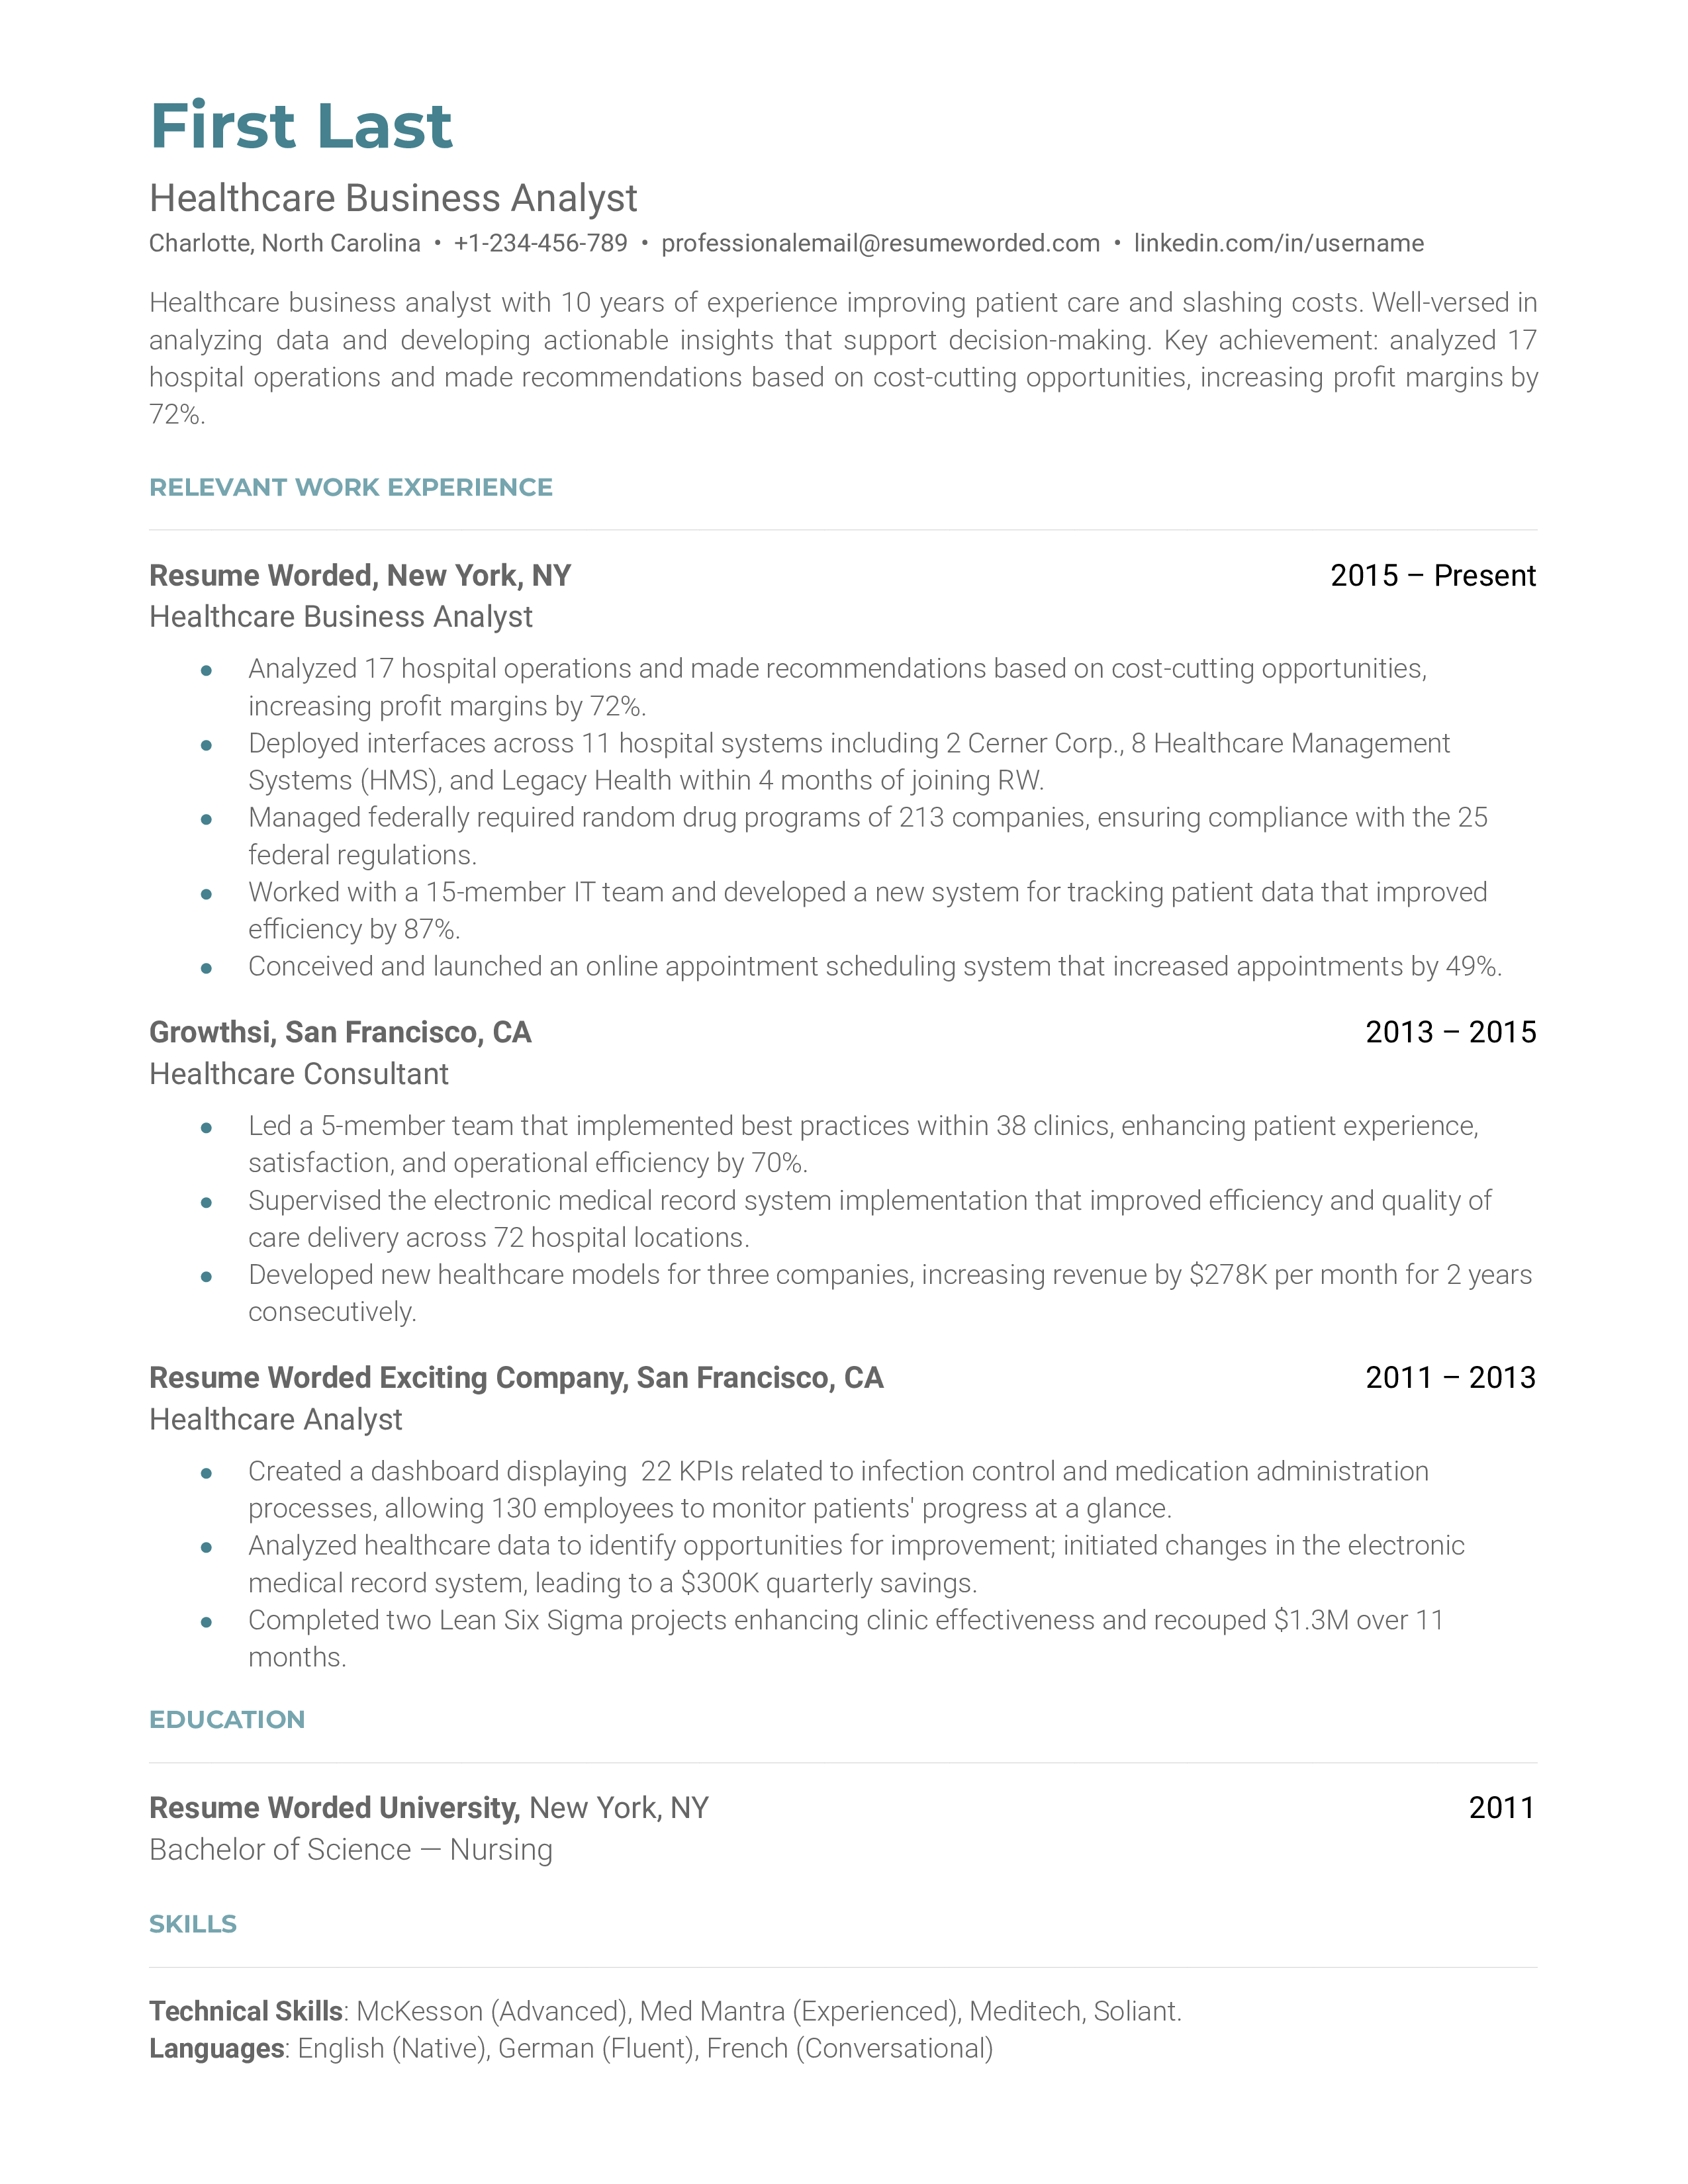 A CV screenshot showcasing detailed experience and skills for the Healthcare Business Analyst role.